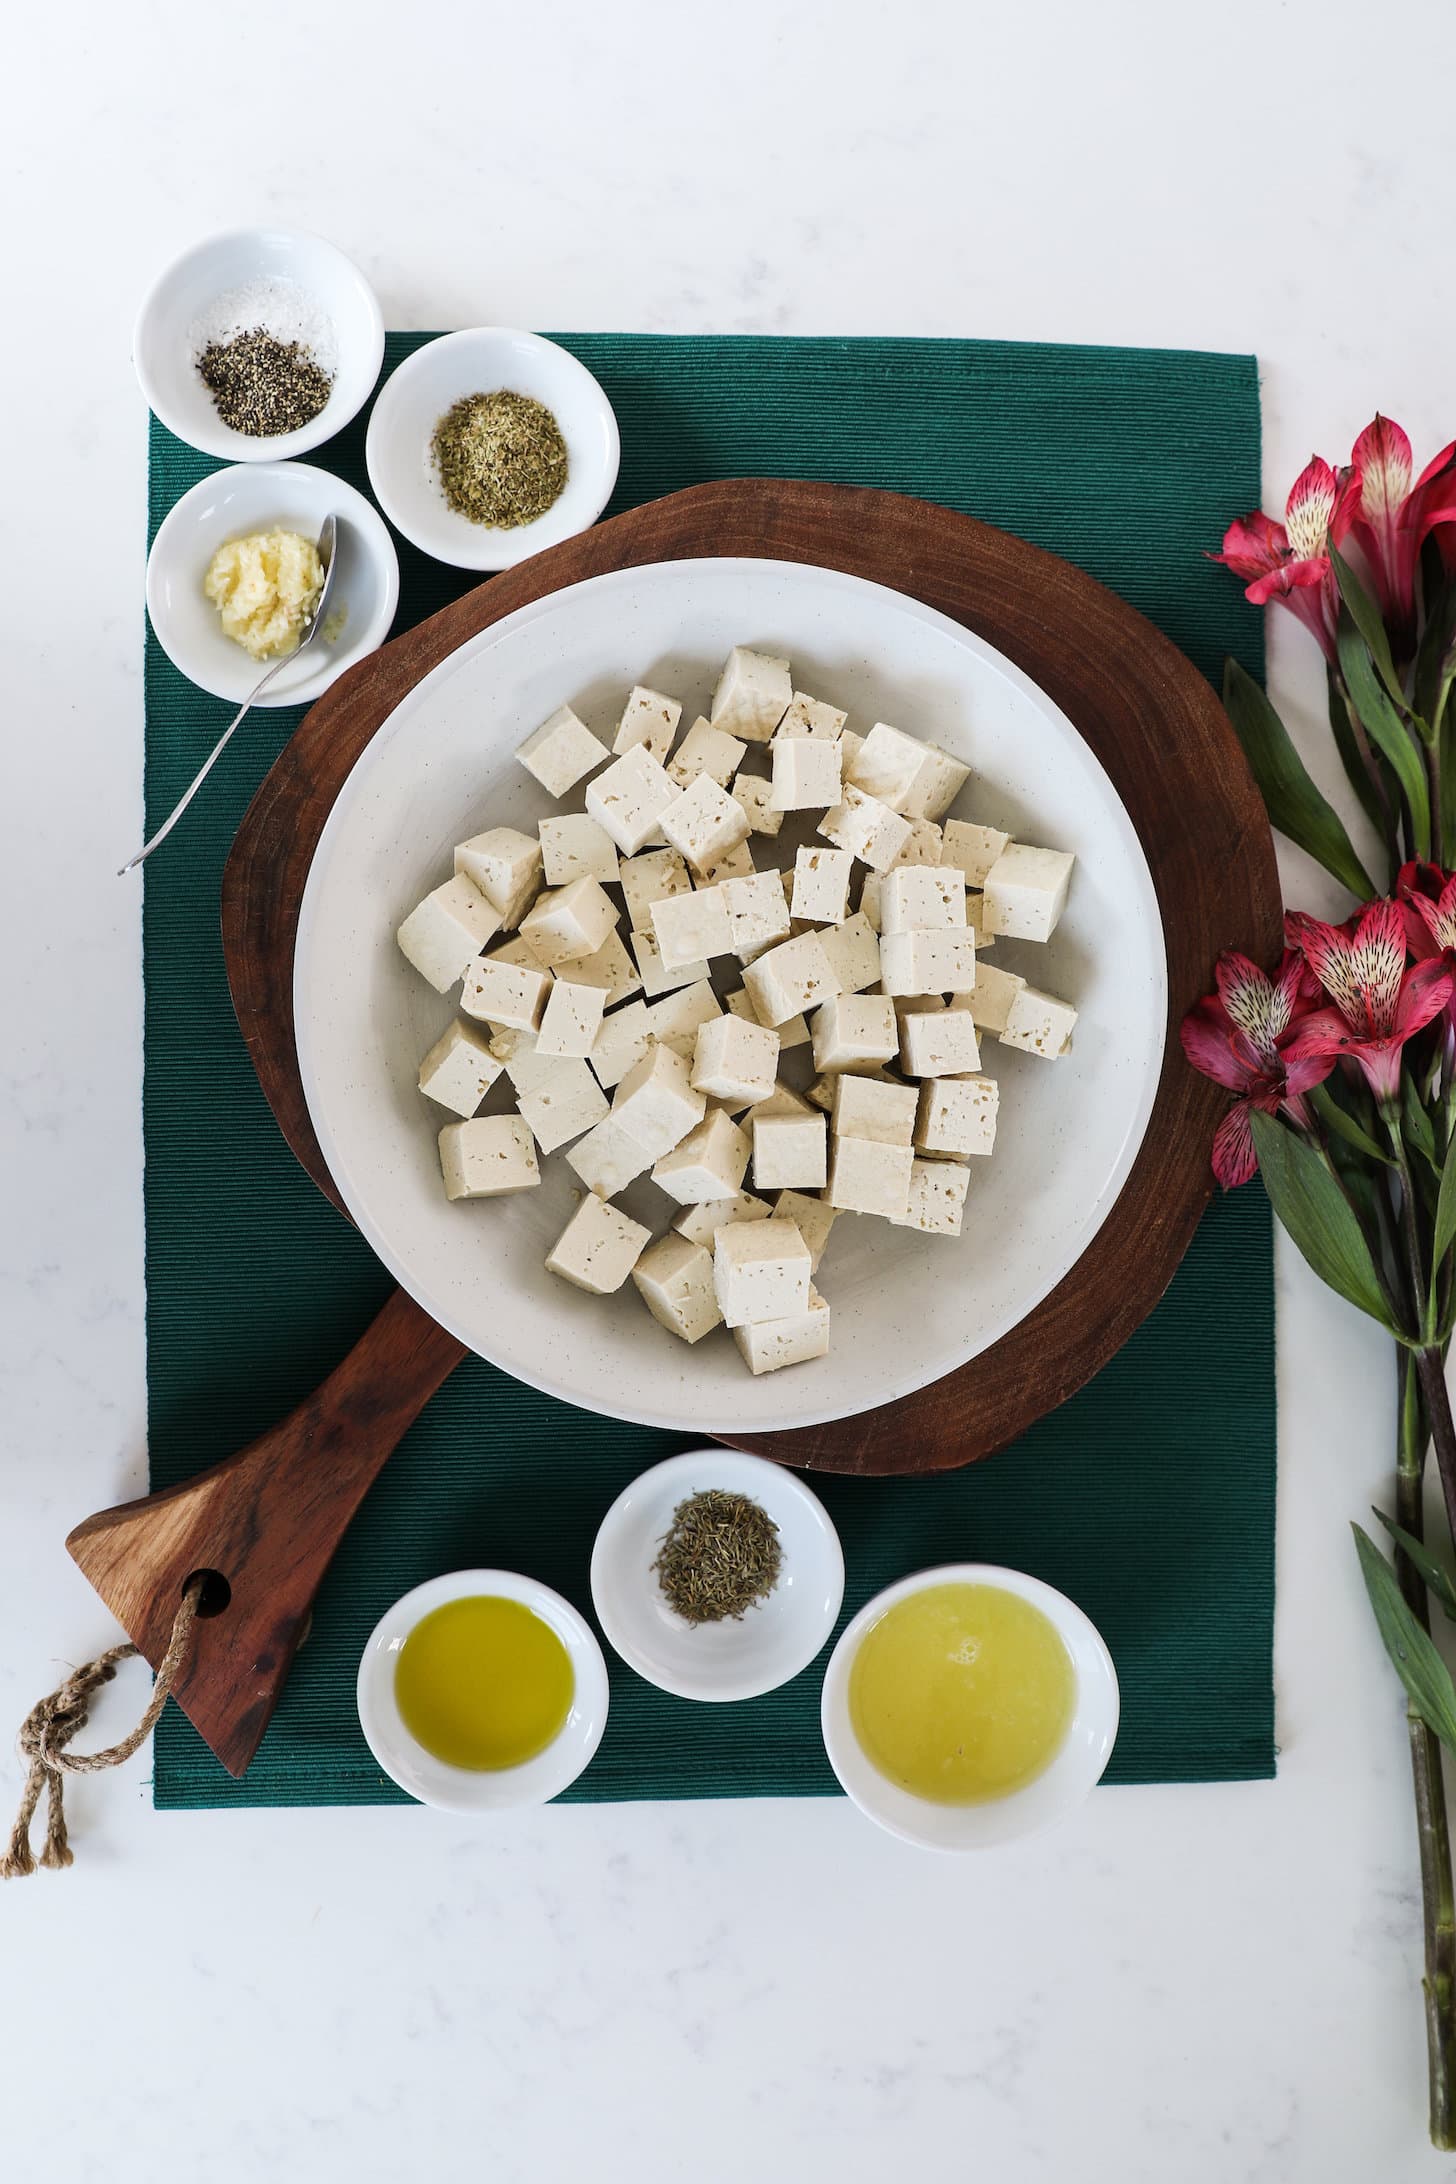 an array of ingredients including tofu cubes, oil, dried herbs, seasoning and juice.